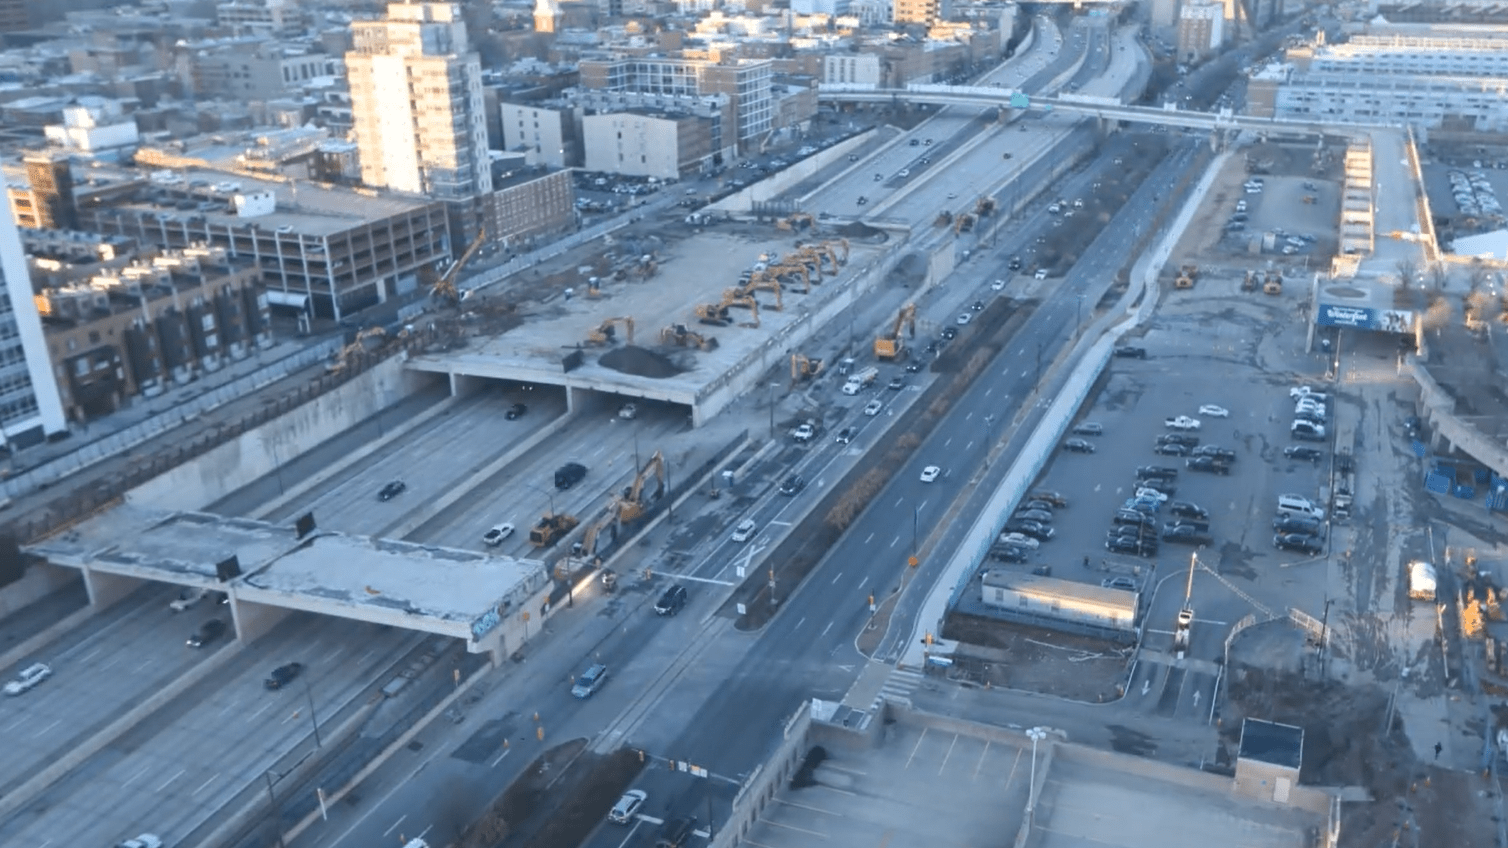 An aerial image showing various pieces of construction equipment staged atop an existing covered area over Interstate 95 in Philadelphia, while construction crews work to demolish areas along the interstate